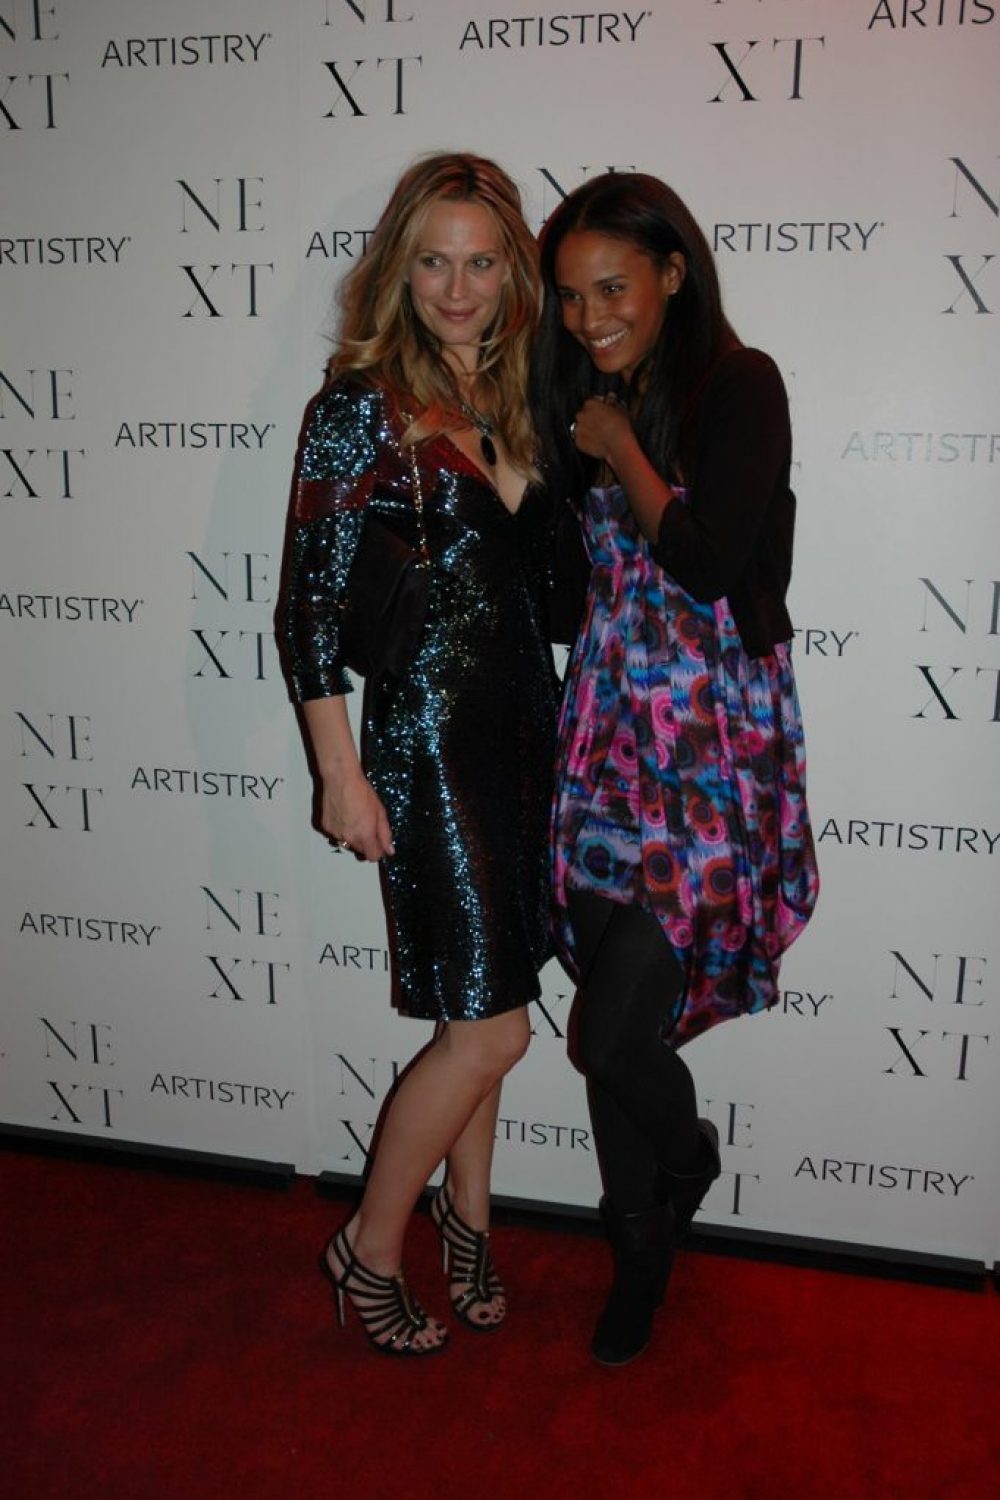 More on the Artistry Party at Marquee